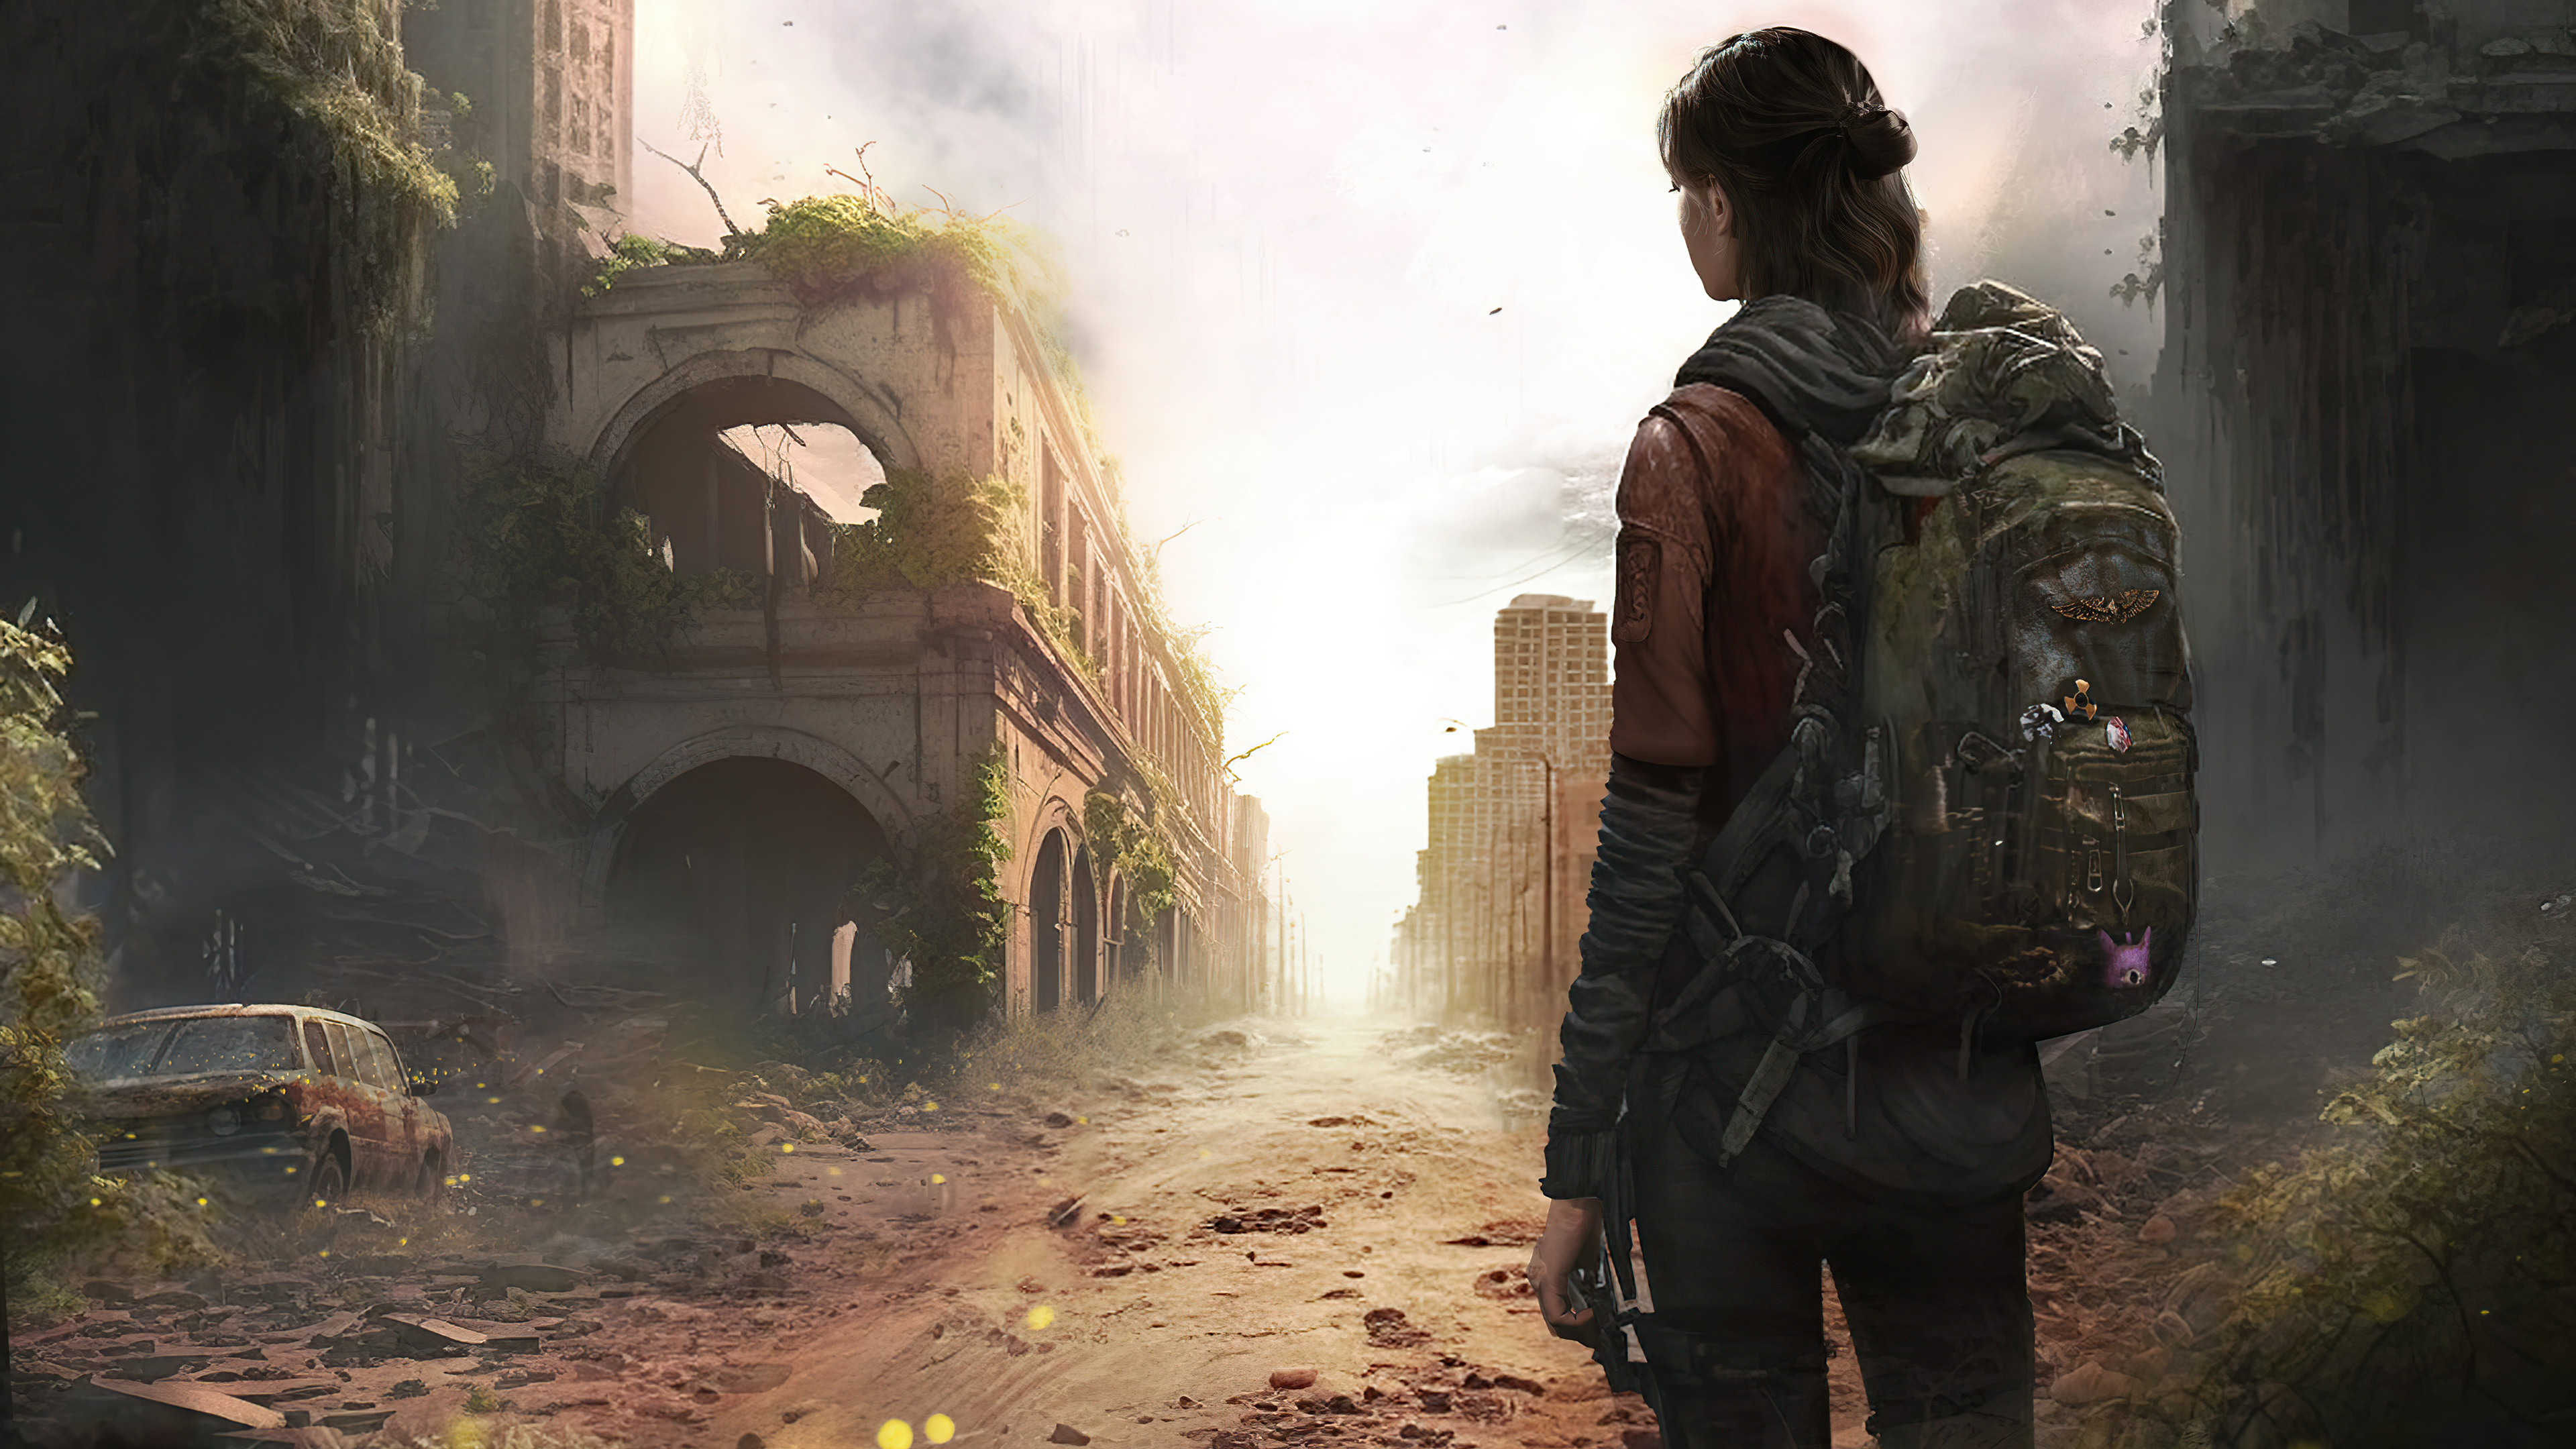 3840x2160 The Last Of Us Ellie 4K ,HD 4k Wallpapers,Images,Backgrounds,Photos  and Pictures